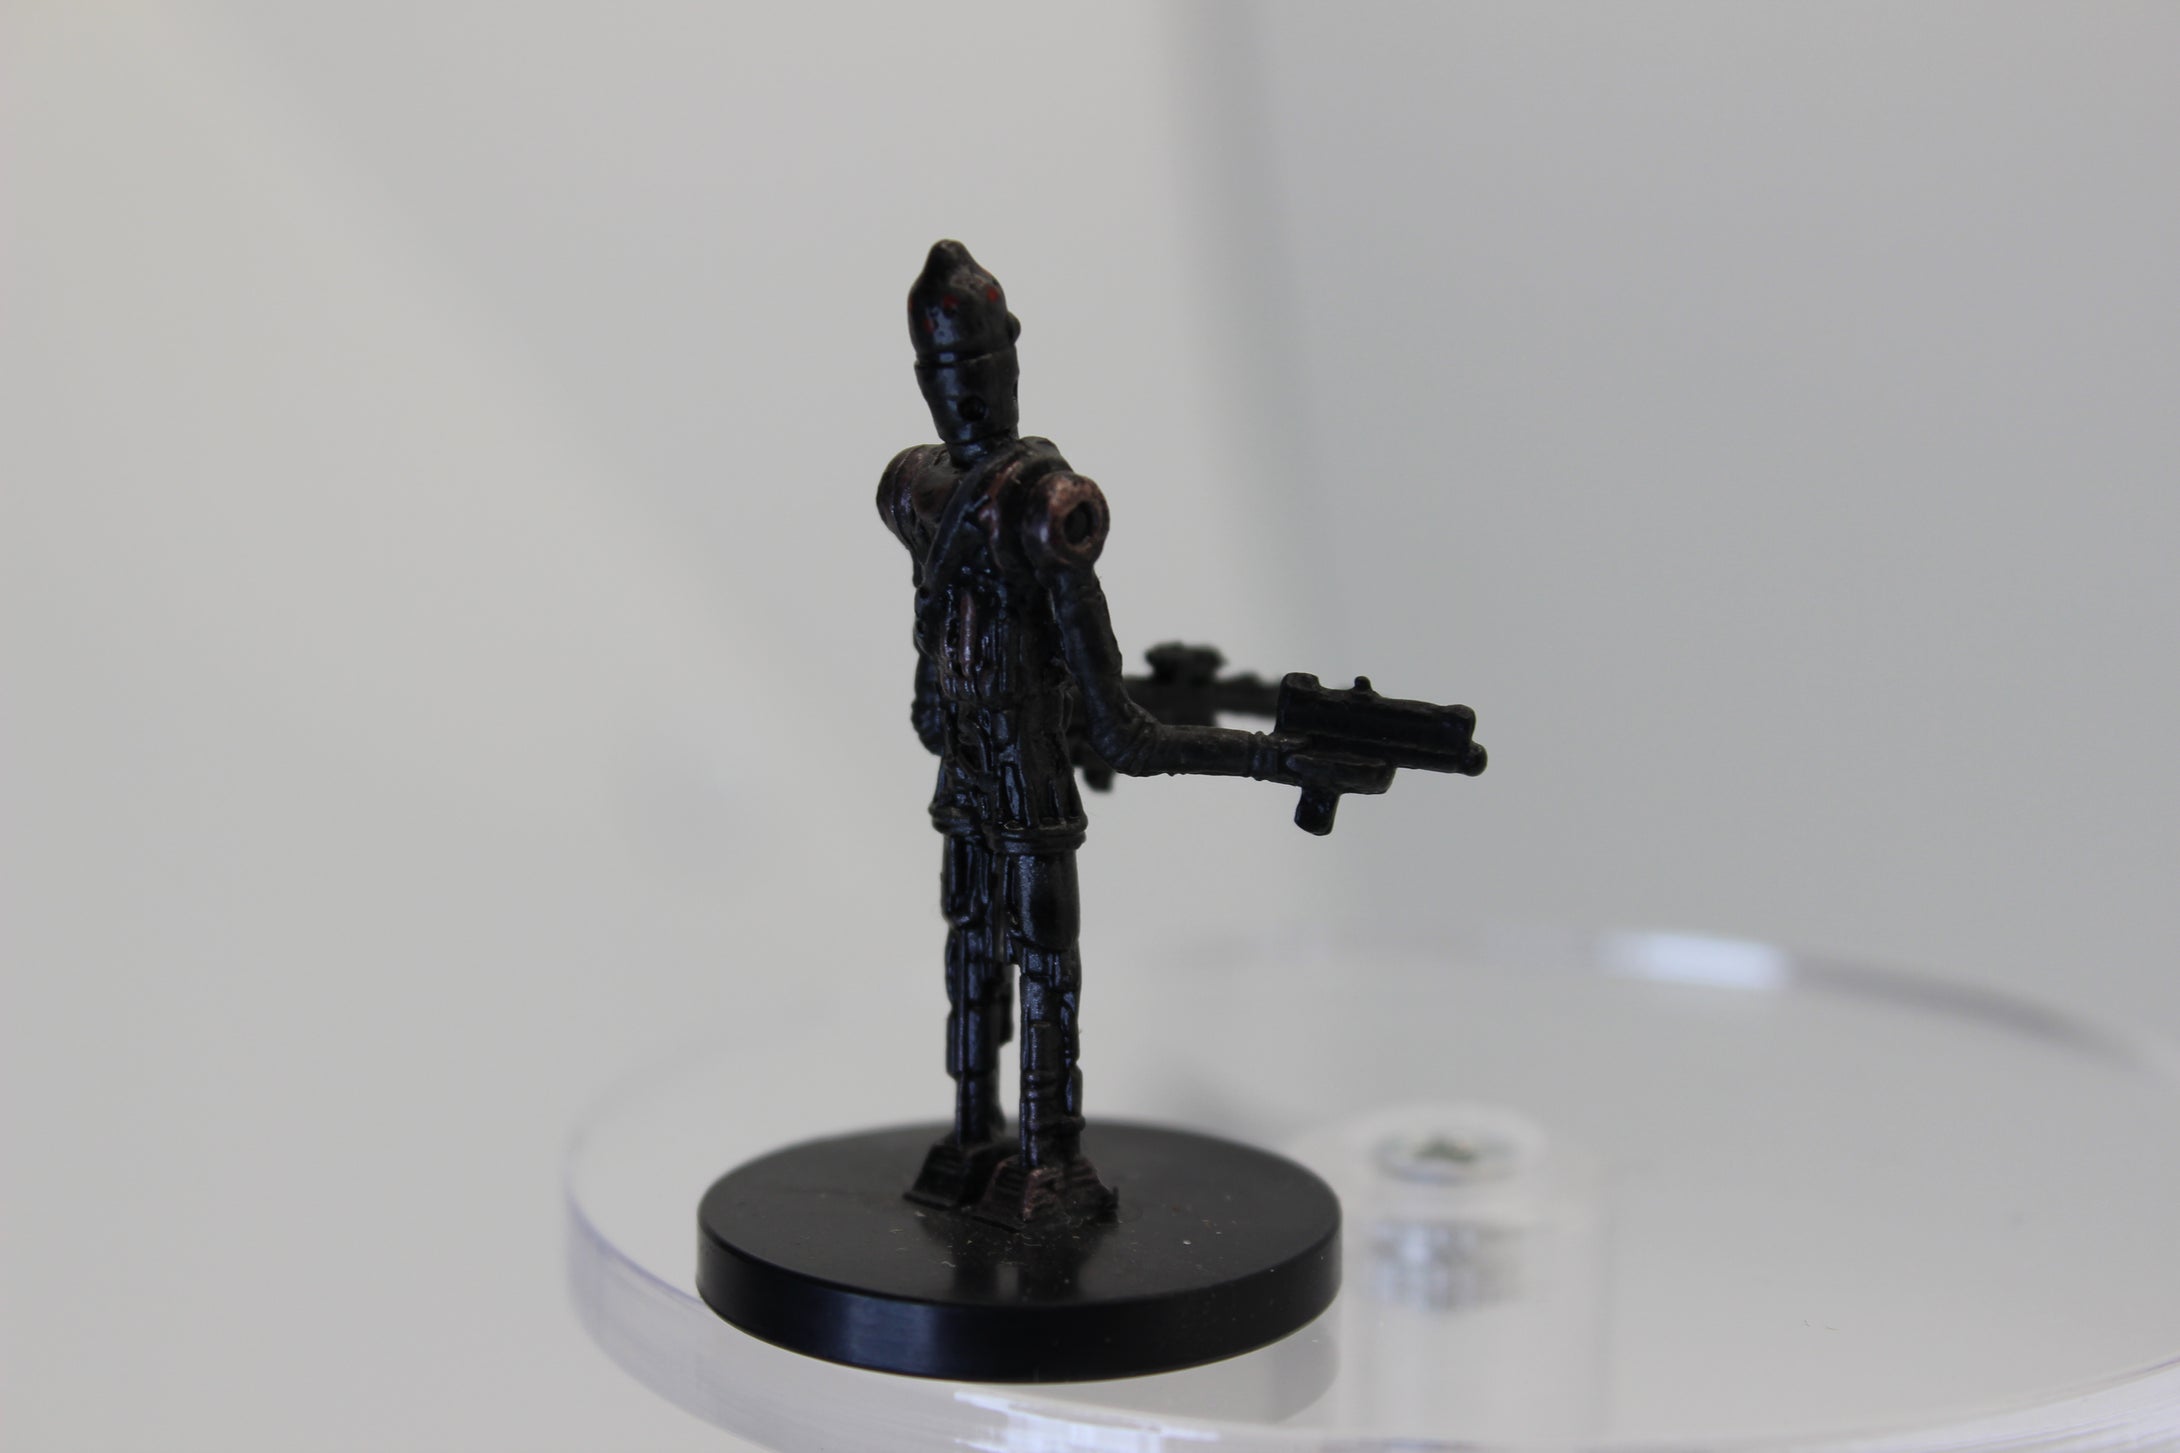 IG-88 (Collectible) (SciFi)